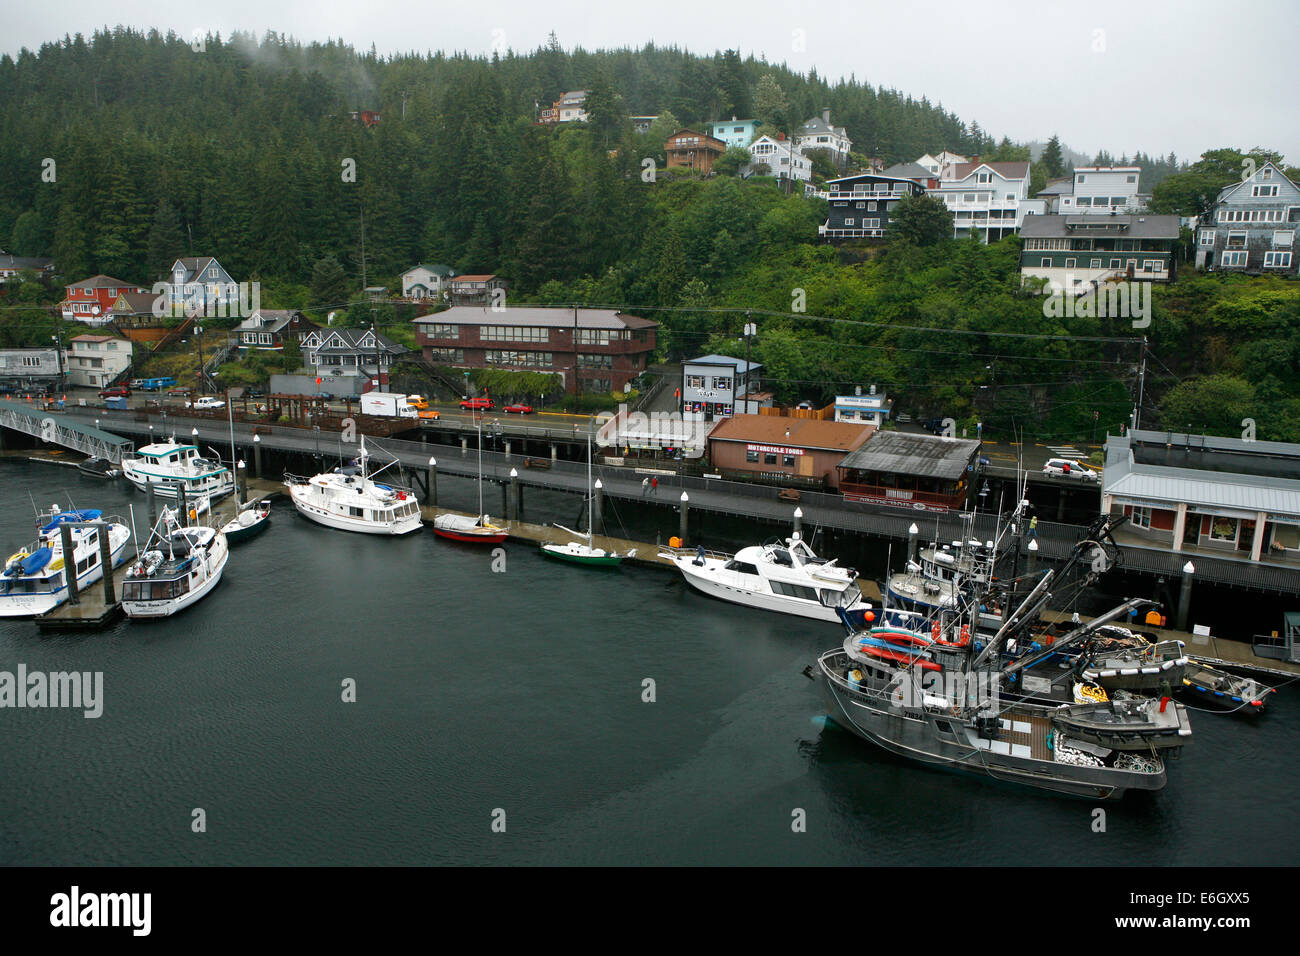 Ketchikan is one of the stops on the Alaskan cruise for the Norwegian Pearl. Cruise ship tourism drives a large part of the loca Stock Photo